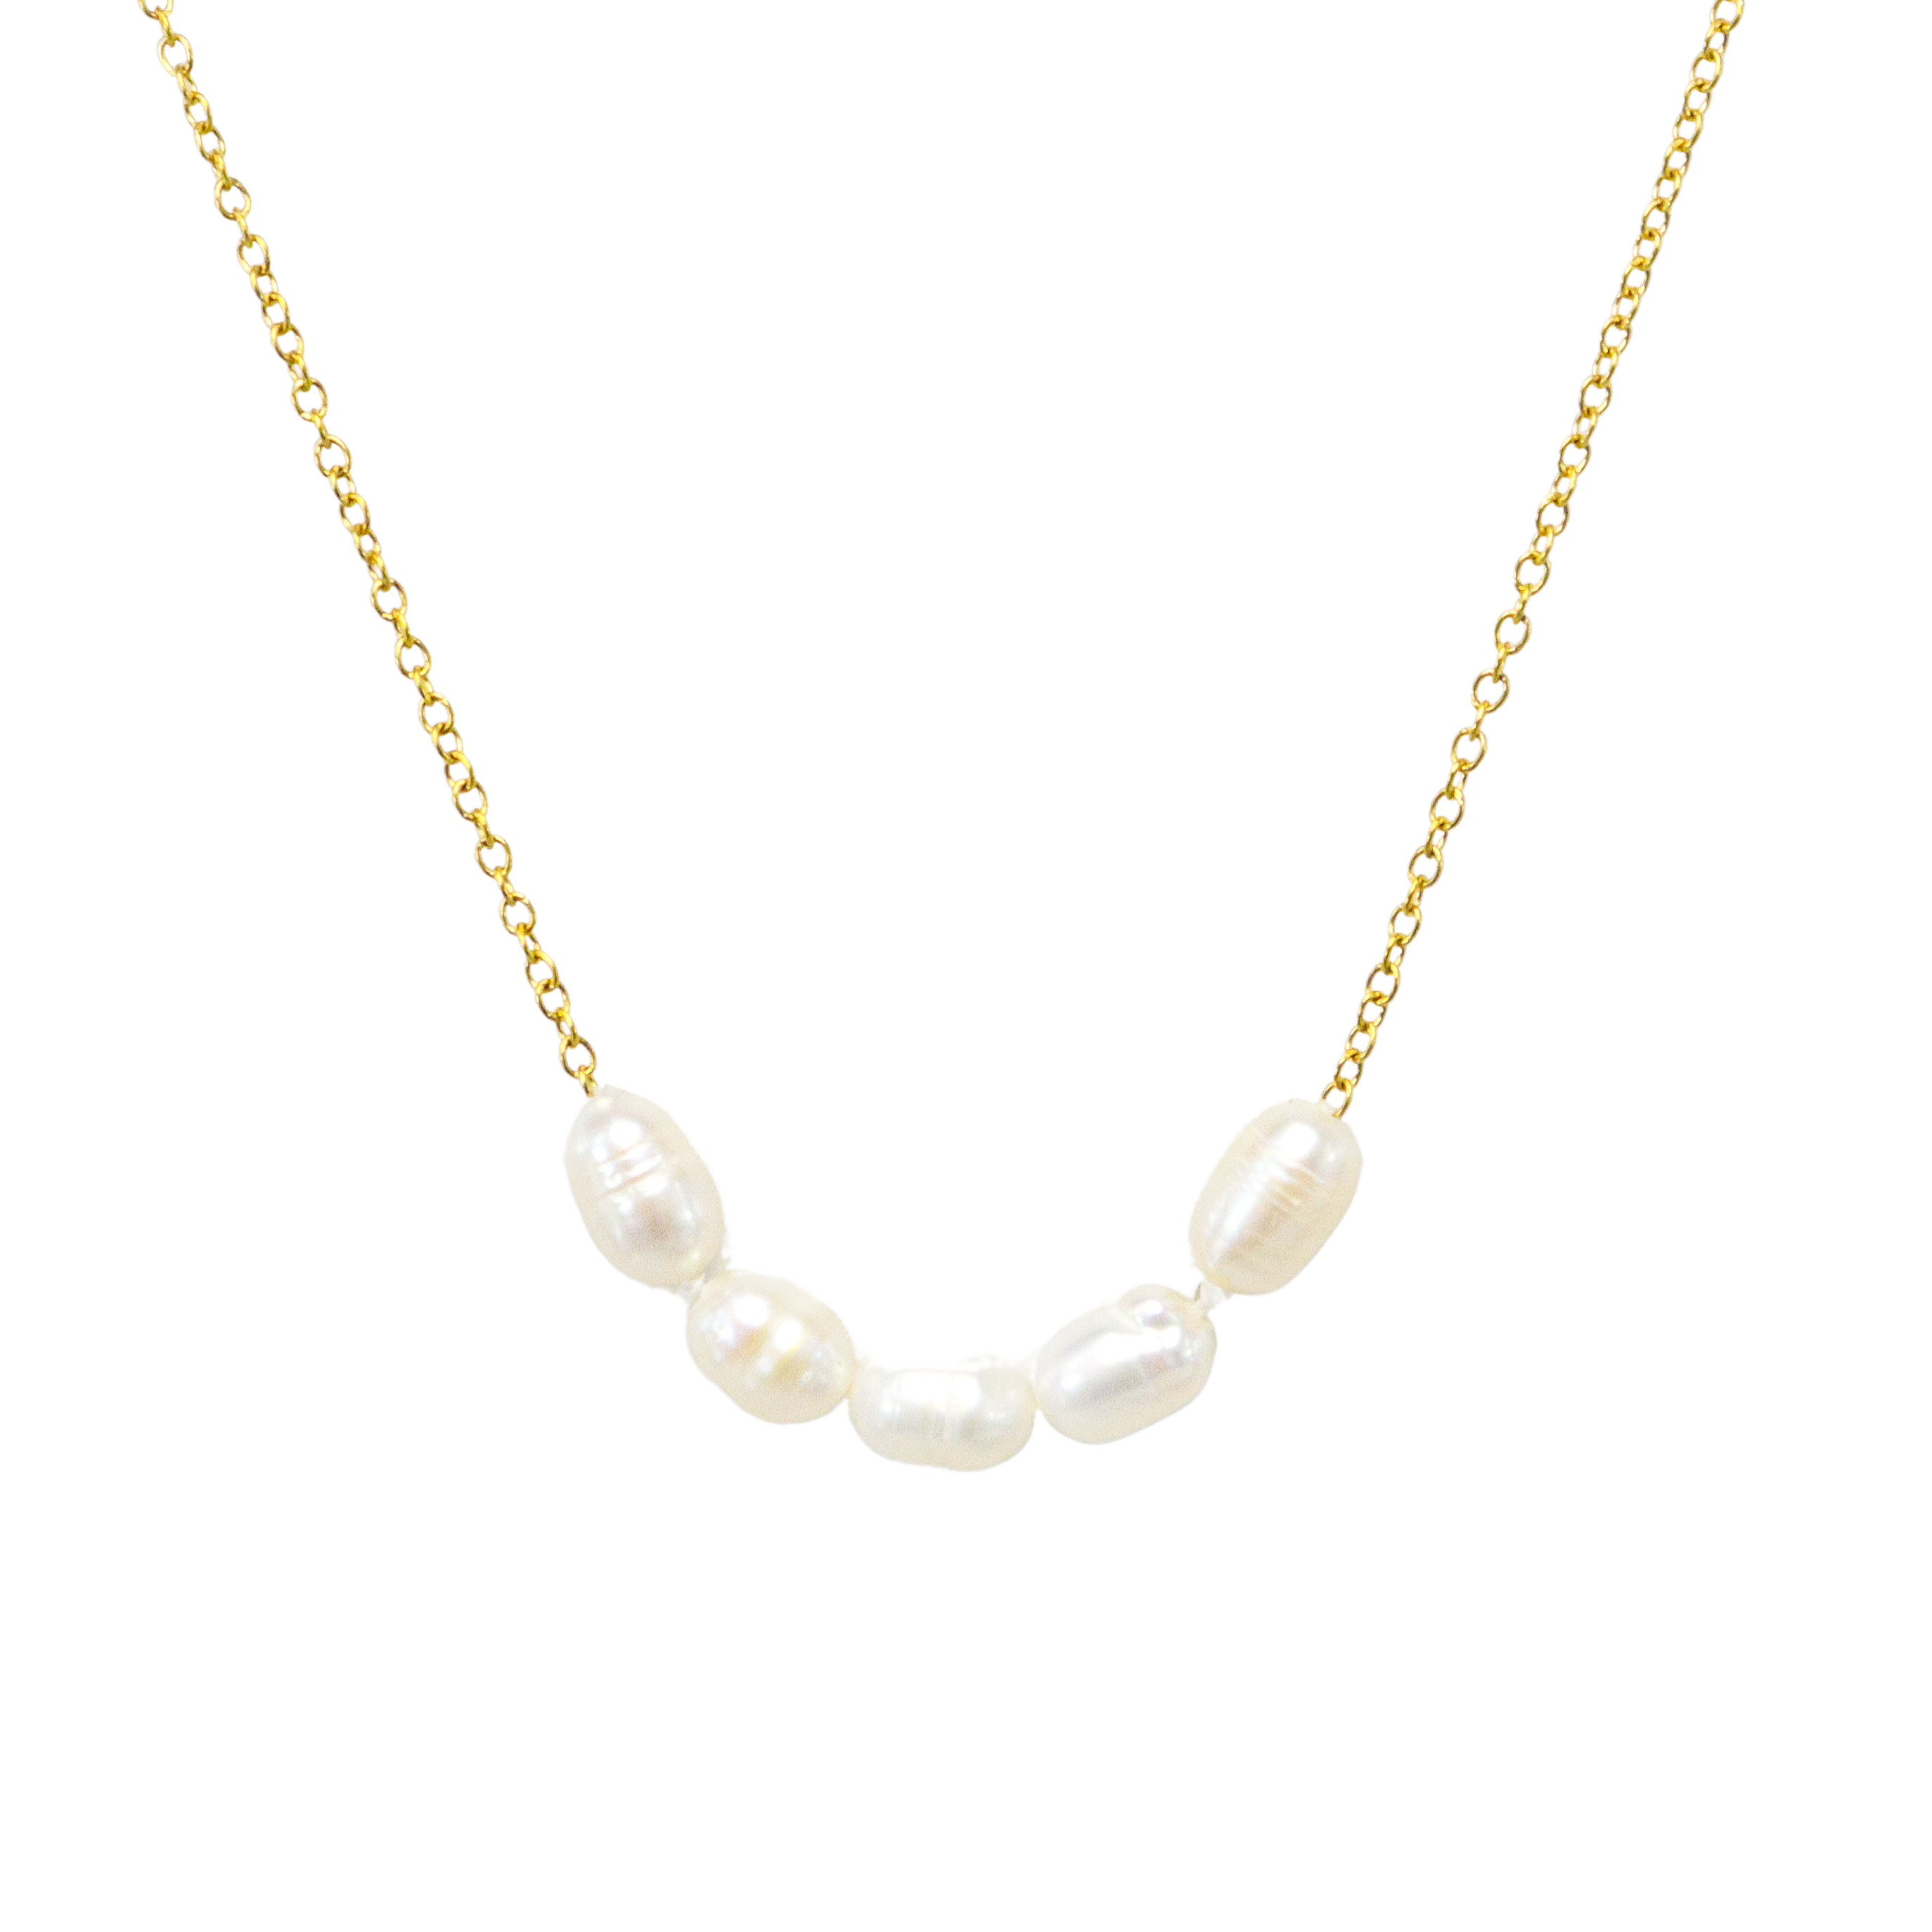 Dainty Gold Fresh Water Pearl Necklace